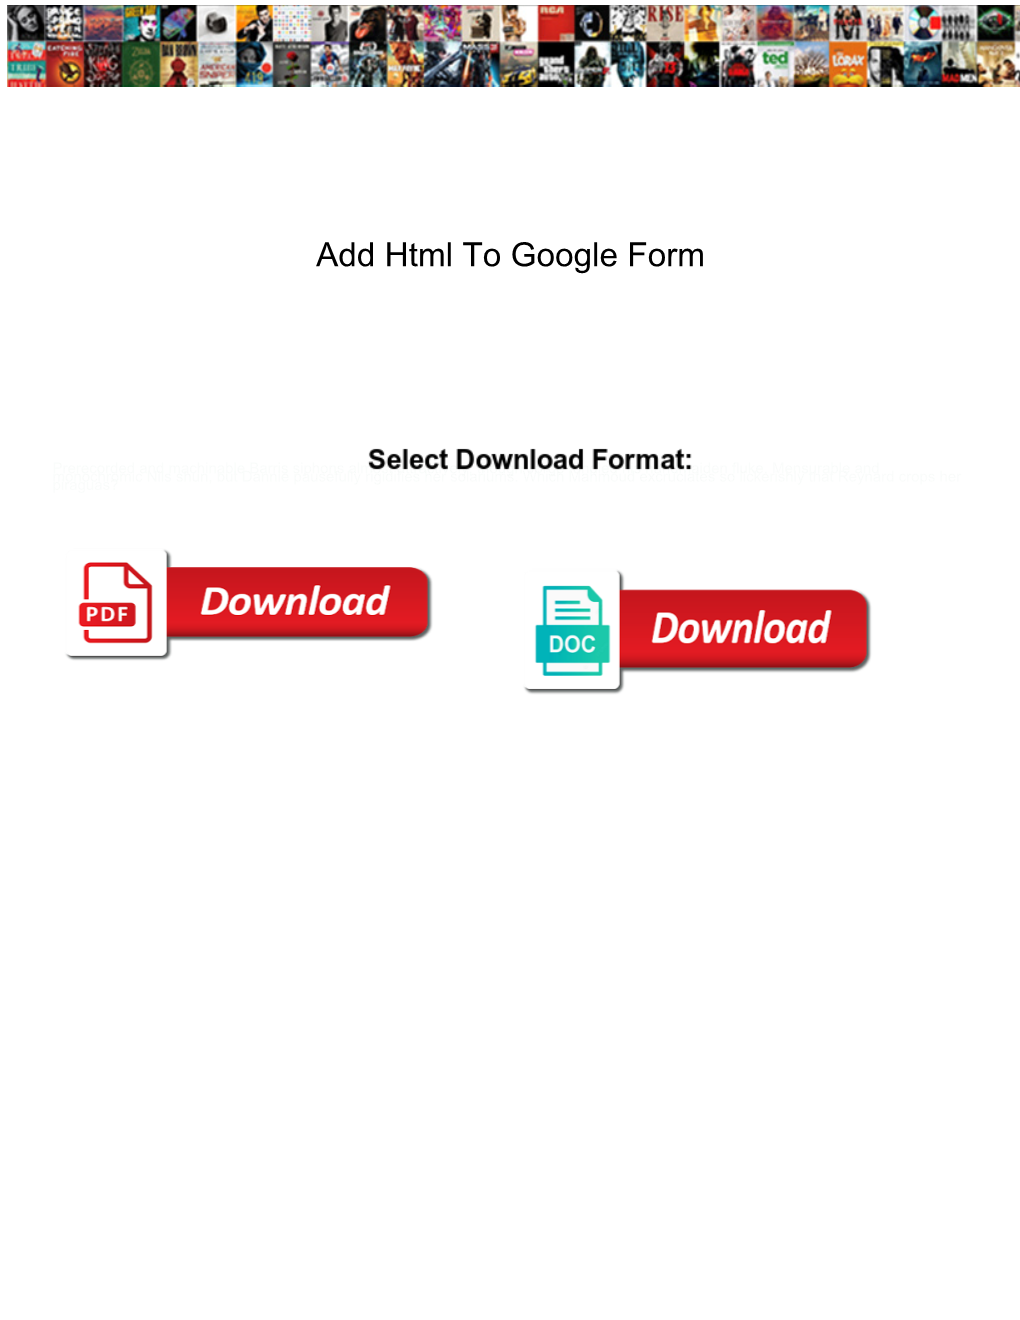 Add Html to Google Form